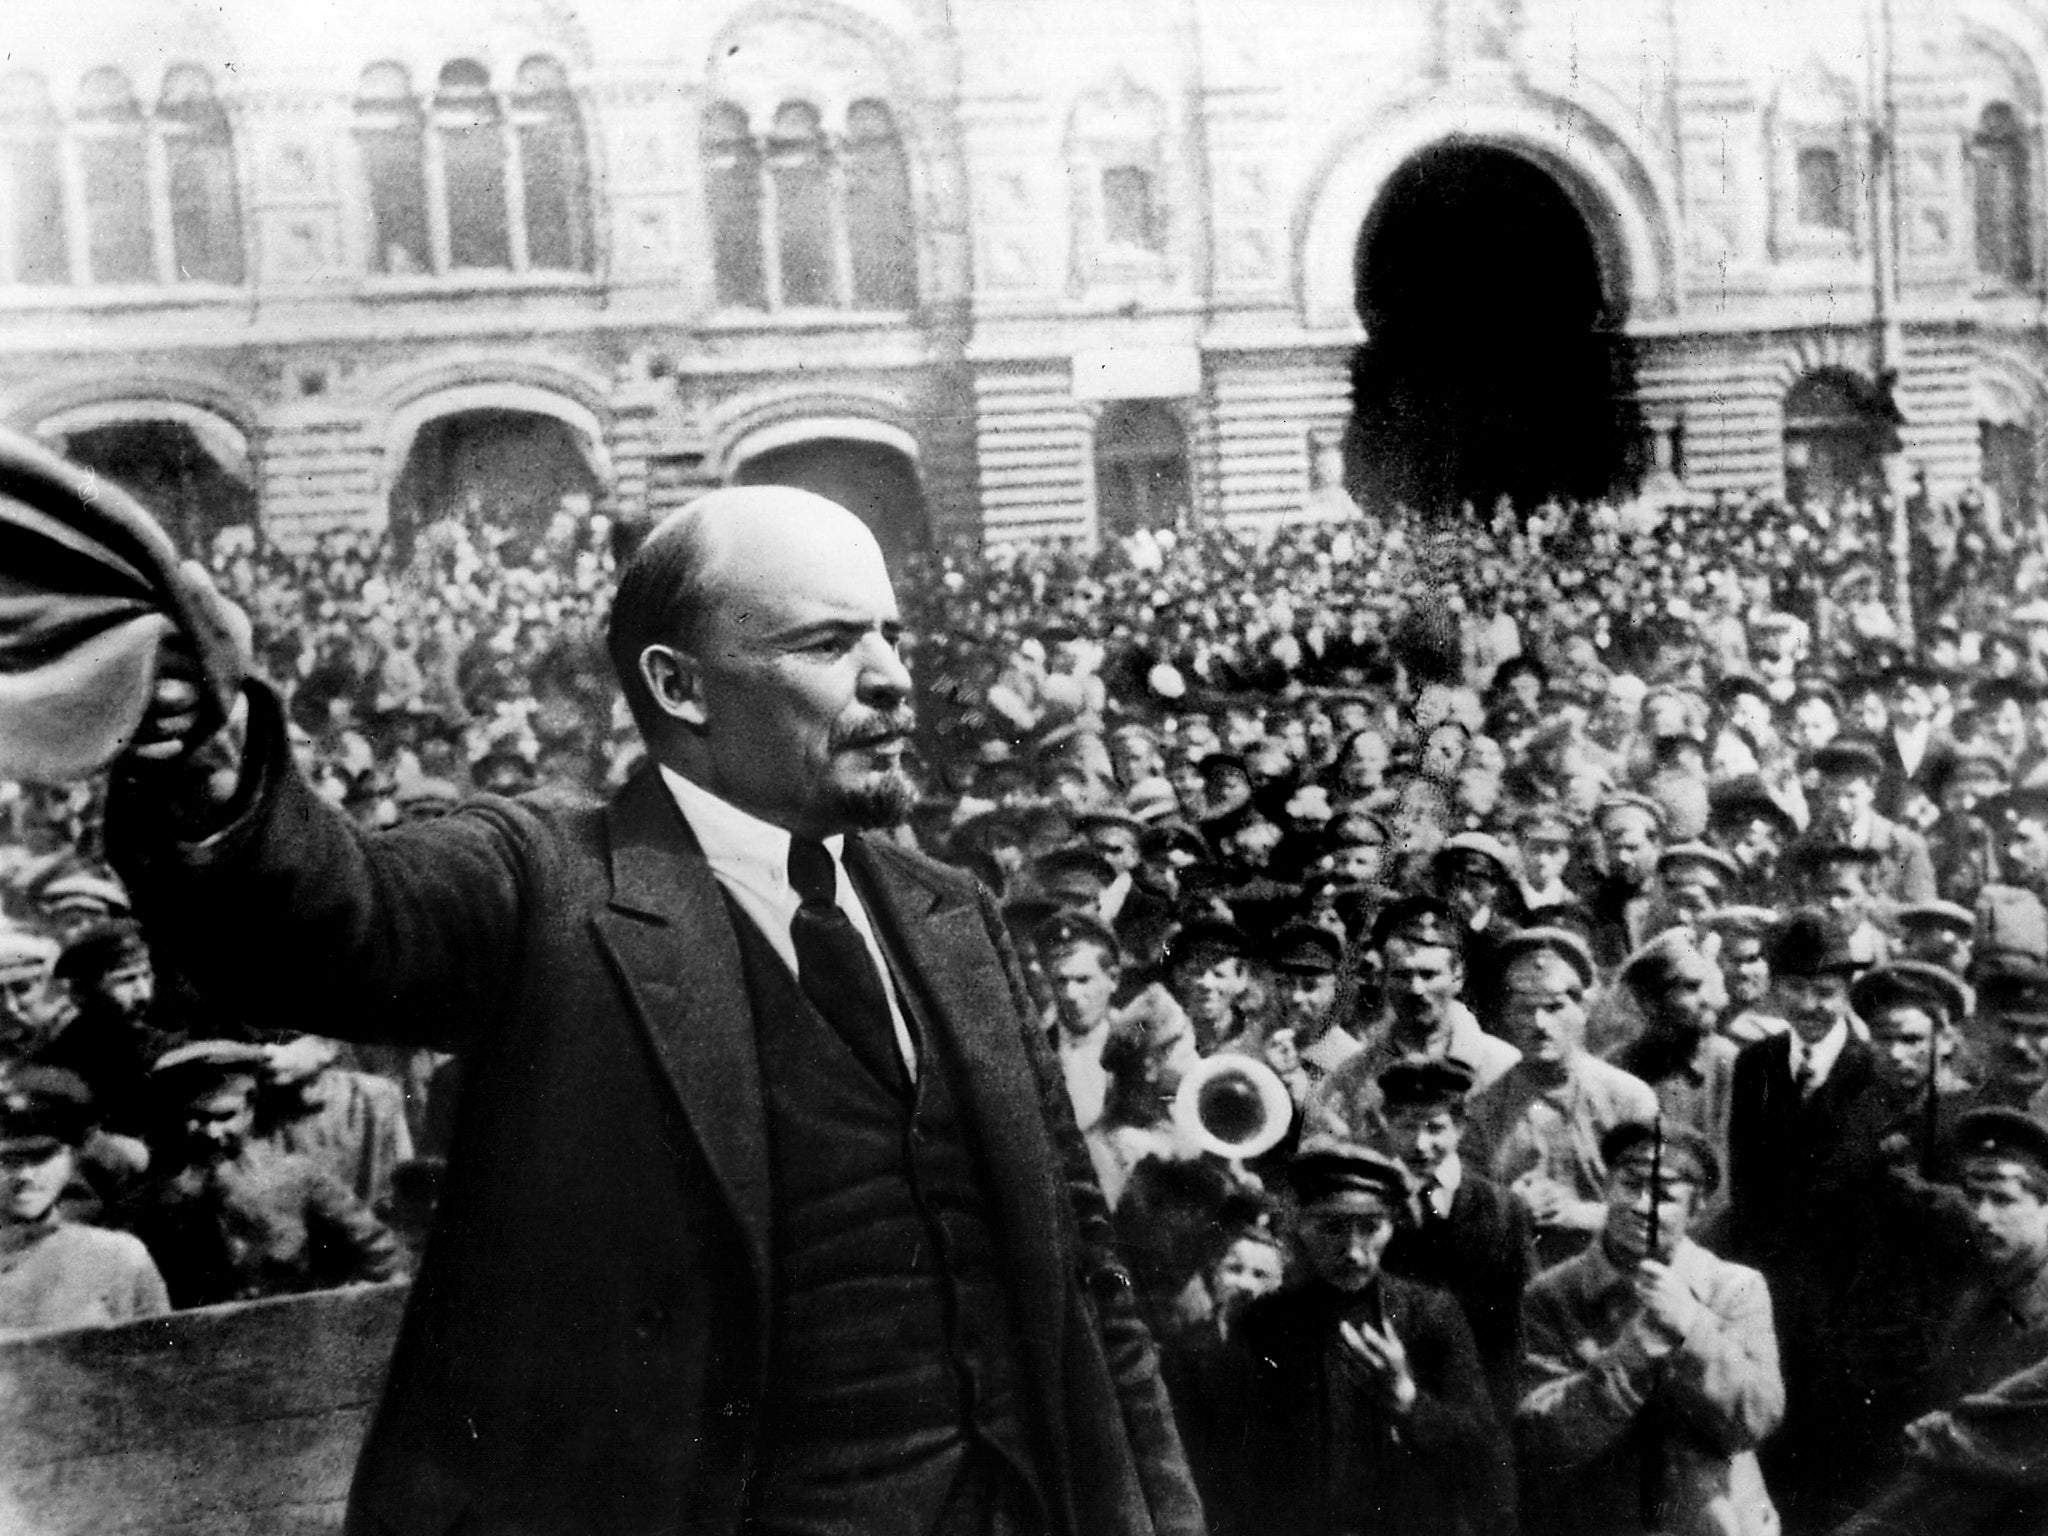 Lenin in 1917: while the revolution brought benefits, including education, to those at the bottom of the social pile, it also destroyed not just the aristocracy, but the first flowering of a middle class